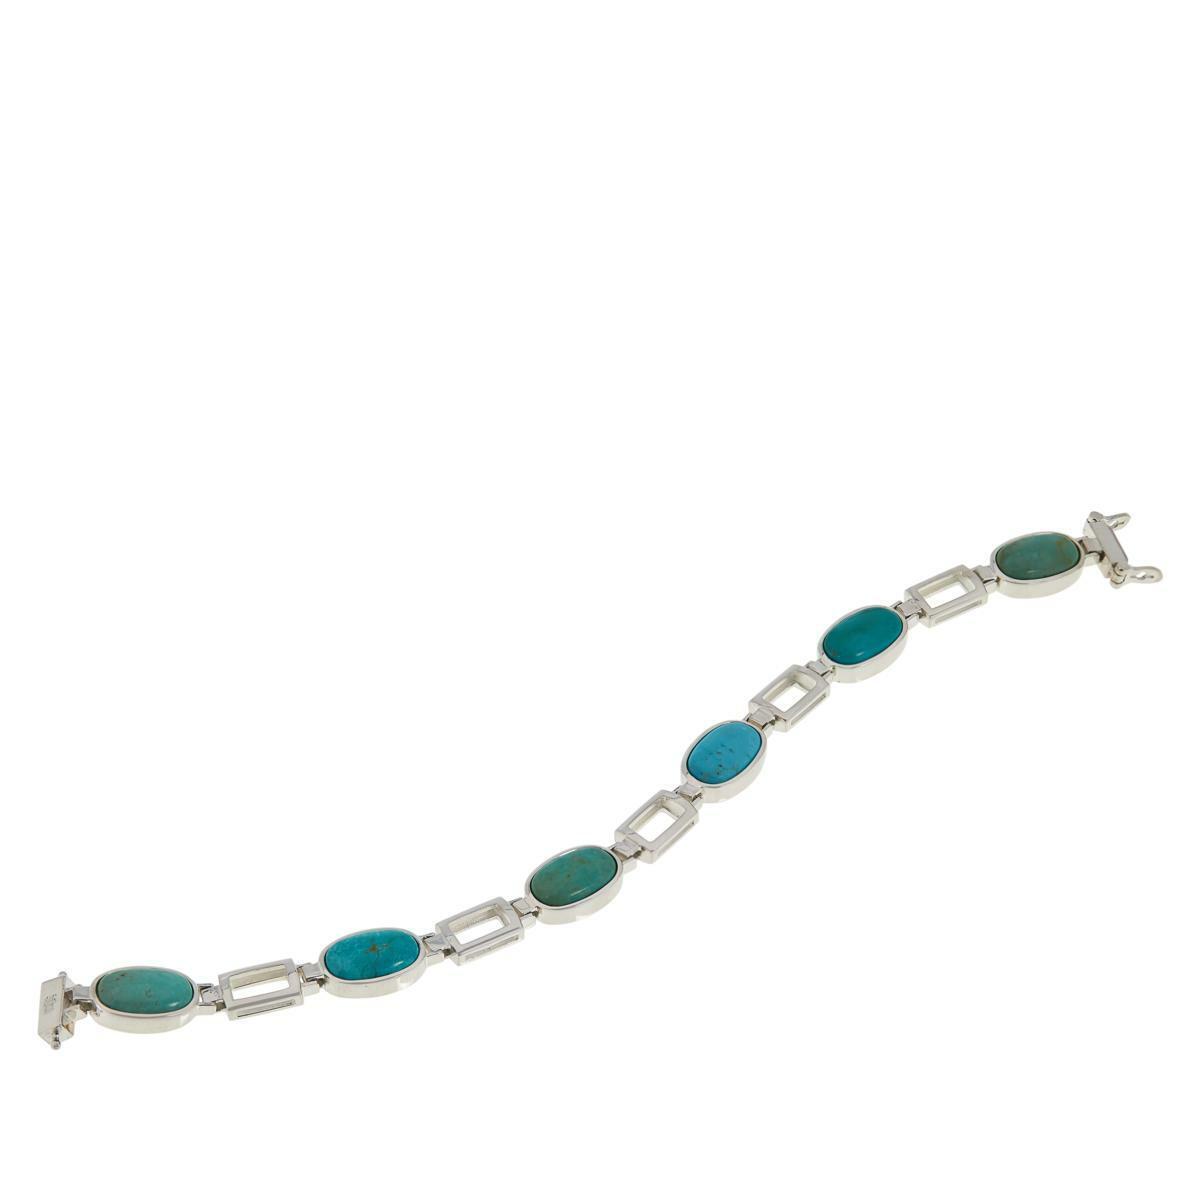 Jay King Turquoise and Butterscotch Amber Reversible Link 6"L Bracelet $200.00